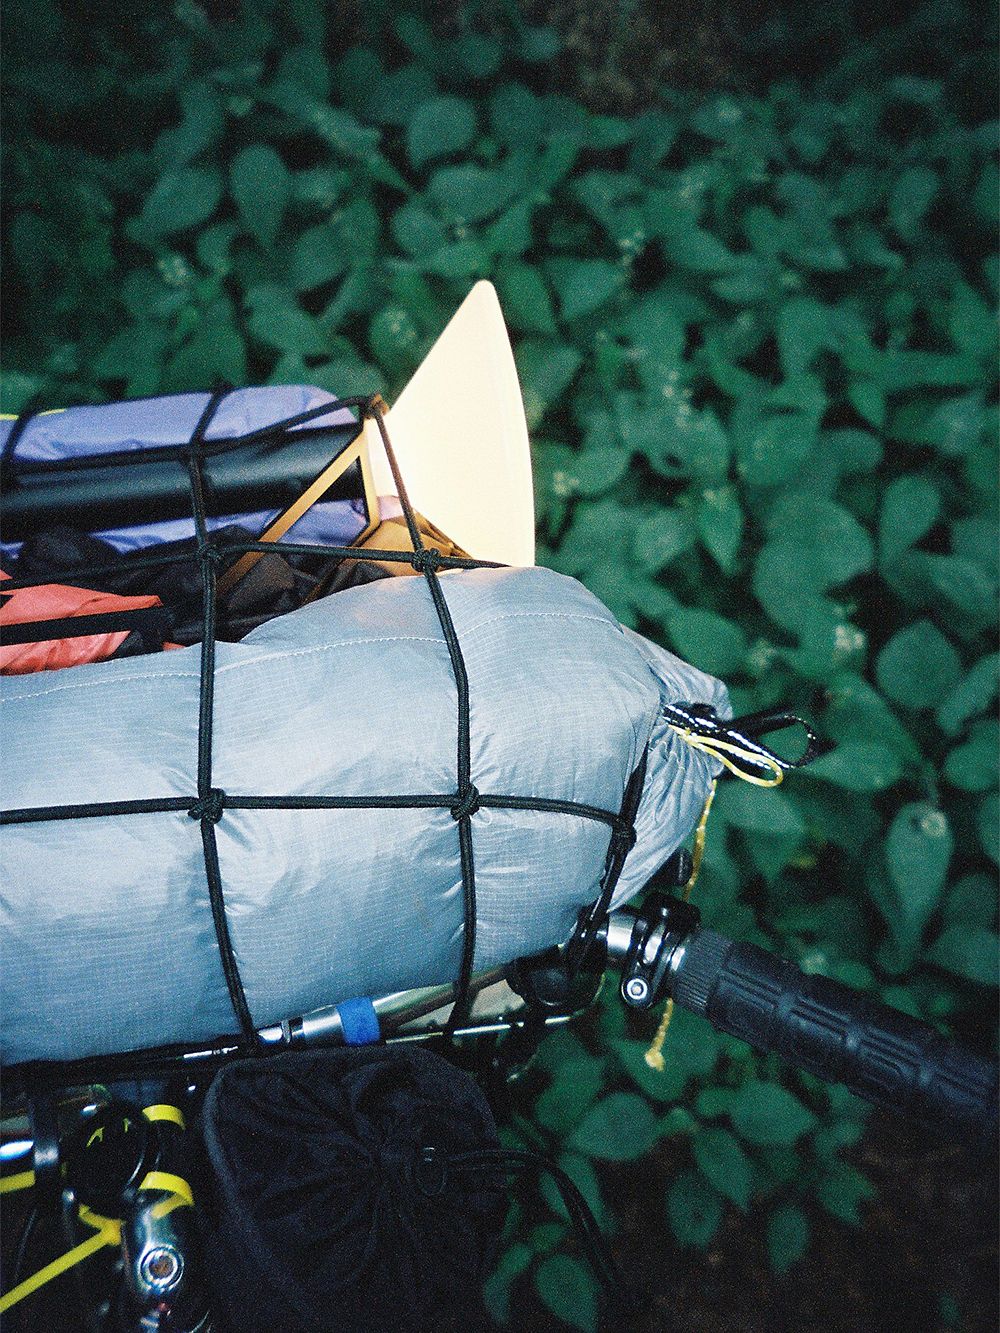 An image of Muuto's Piton luminaire strapped on a bike.